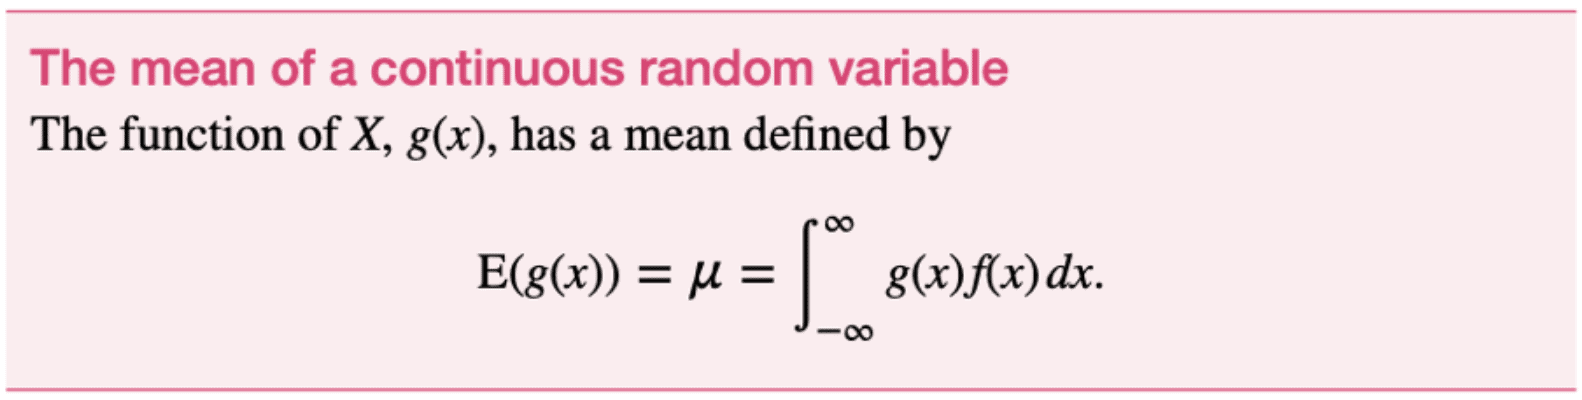 The mean of a continuous random variable